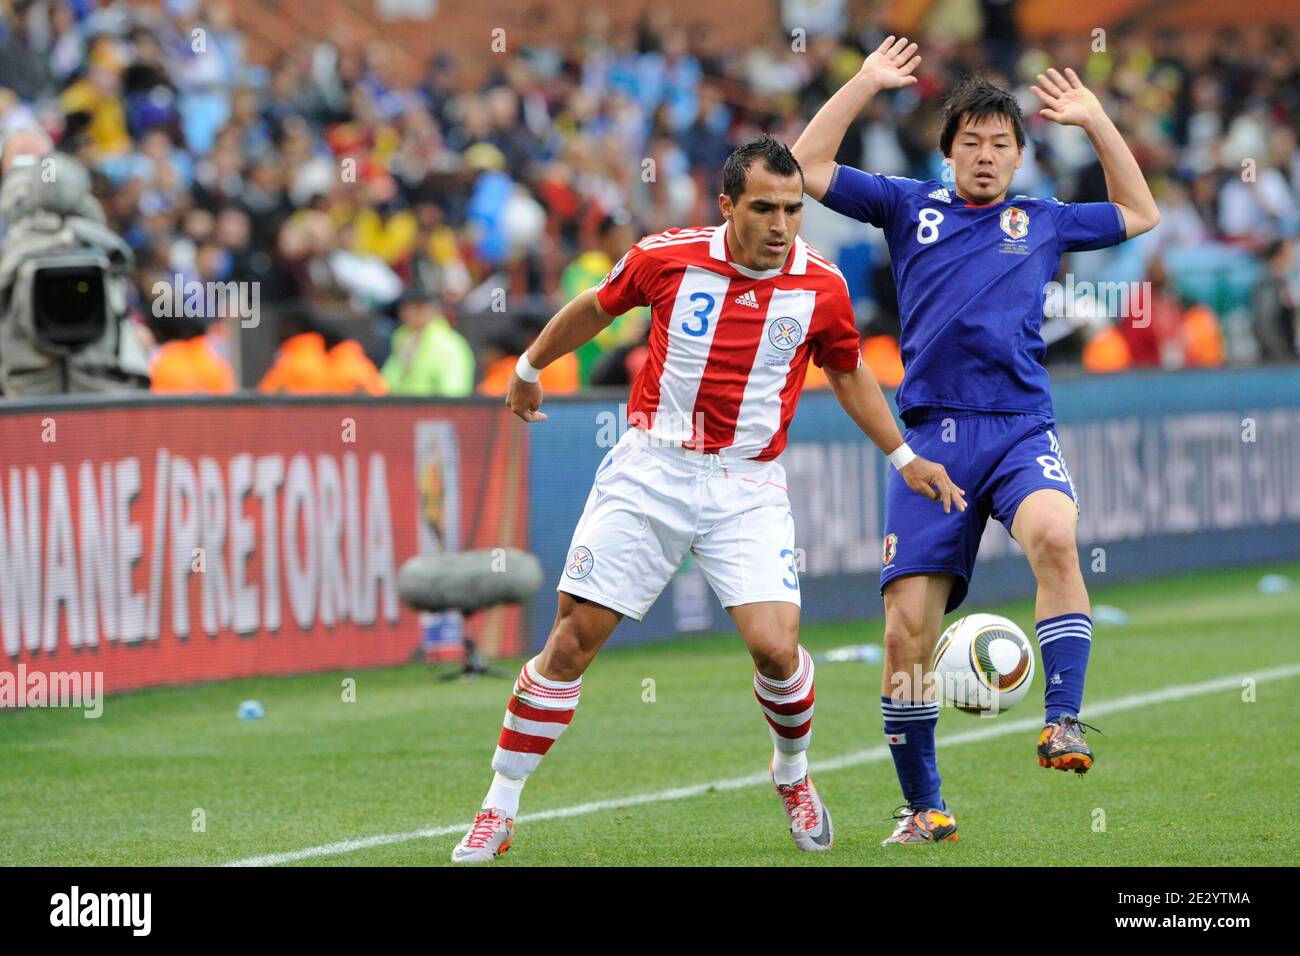 Paraguay's Roque Santa Cruz during the 2010 FIFA World Cup South Africa 1/8  of final Soccer match, Paraguay vs Japan at Loftus Versfeld football  stadium in Pretoria, South Africa on June 29